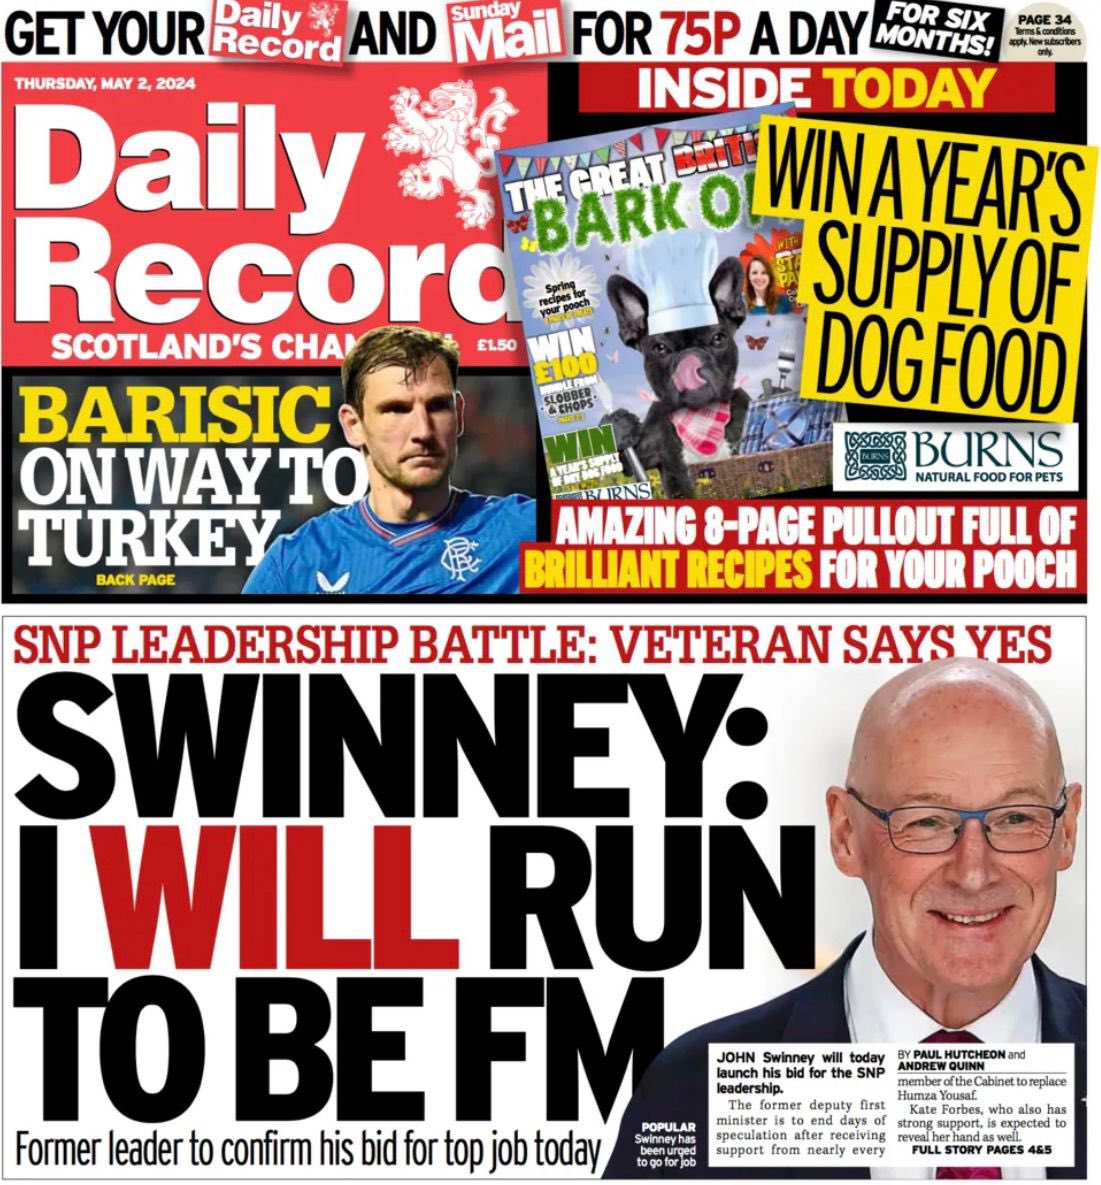 As expected, it looks like John Swinney, another continuity candidate, will reluctantly put himself forward for leader. In the end, it makes no difference who leads the SNP; its interests will always come before those of Scotland.